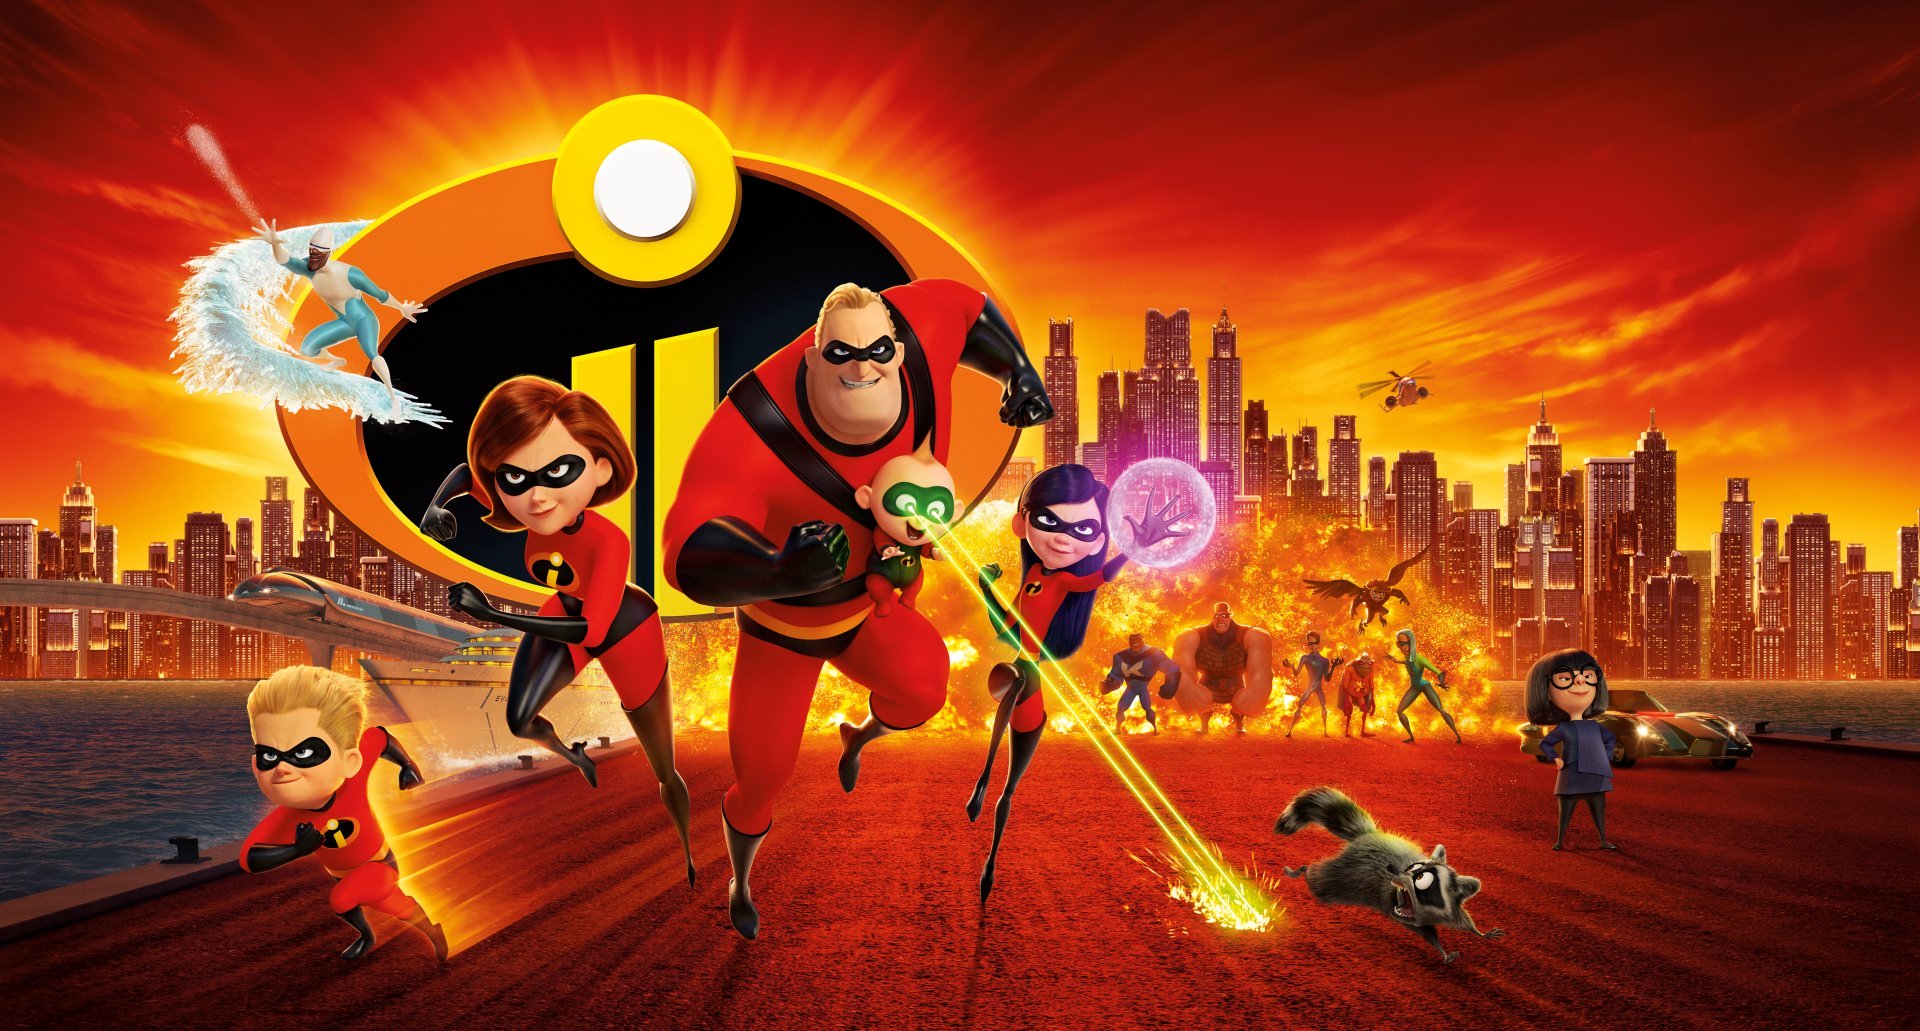 incredibles 2 makes record breaking weekend box office debut